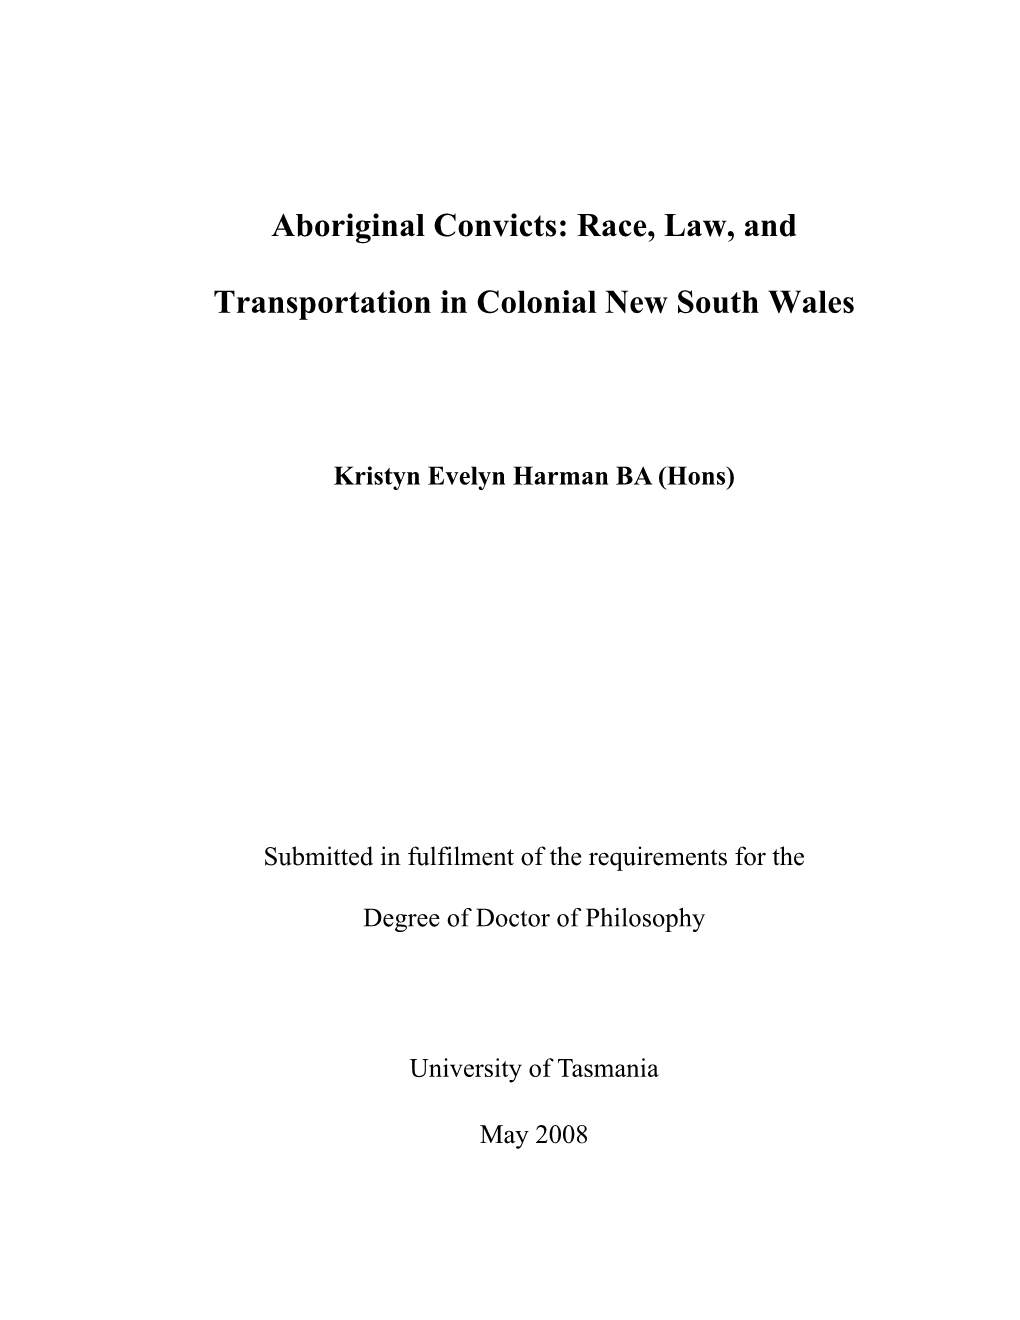 Aboriginal Convicts: Race, Law, and Transportation in Colonial New